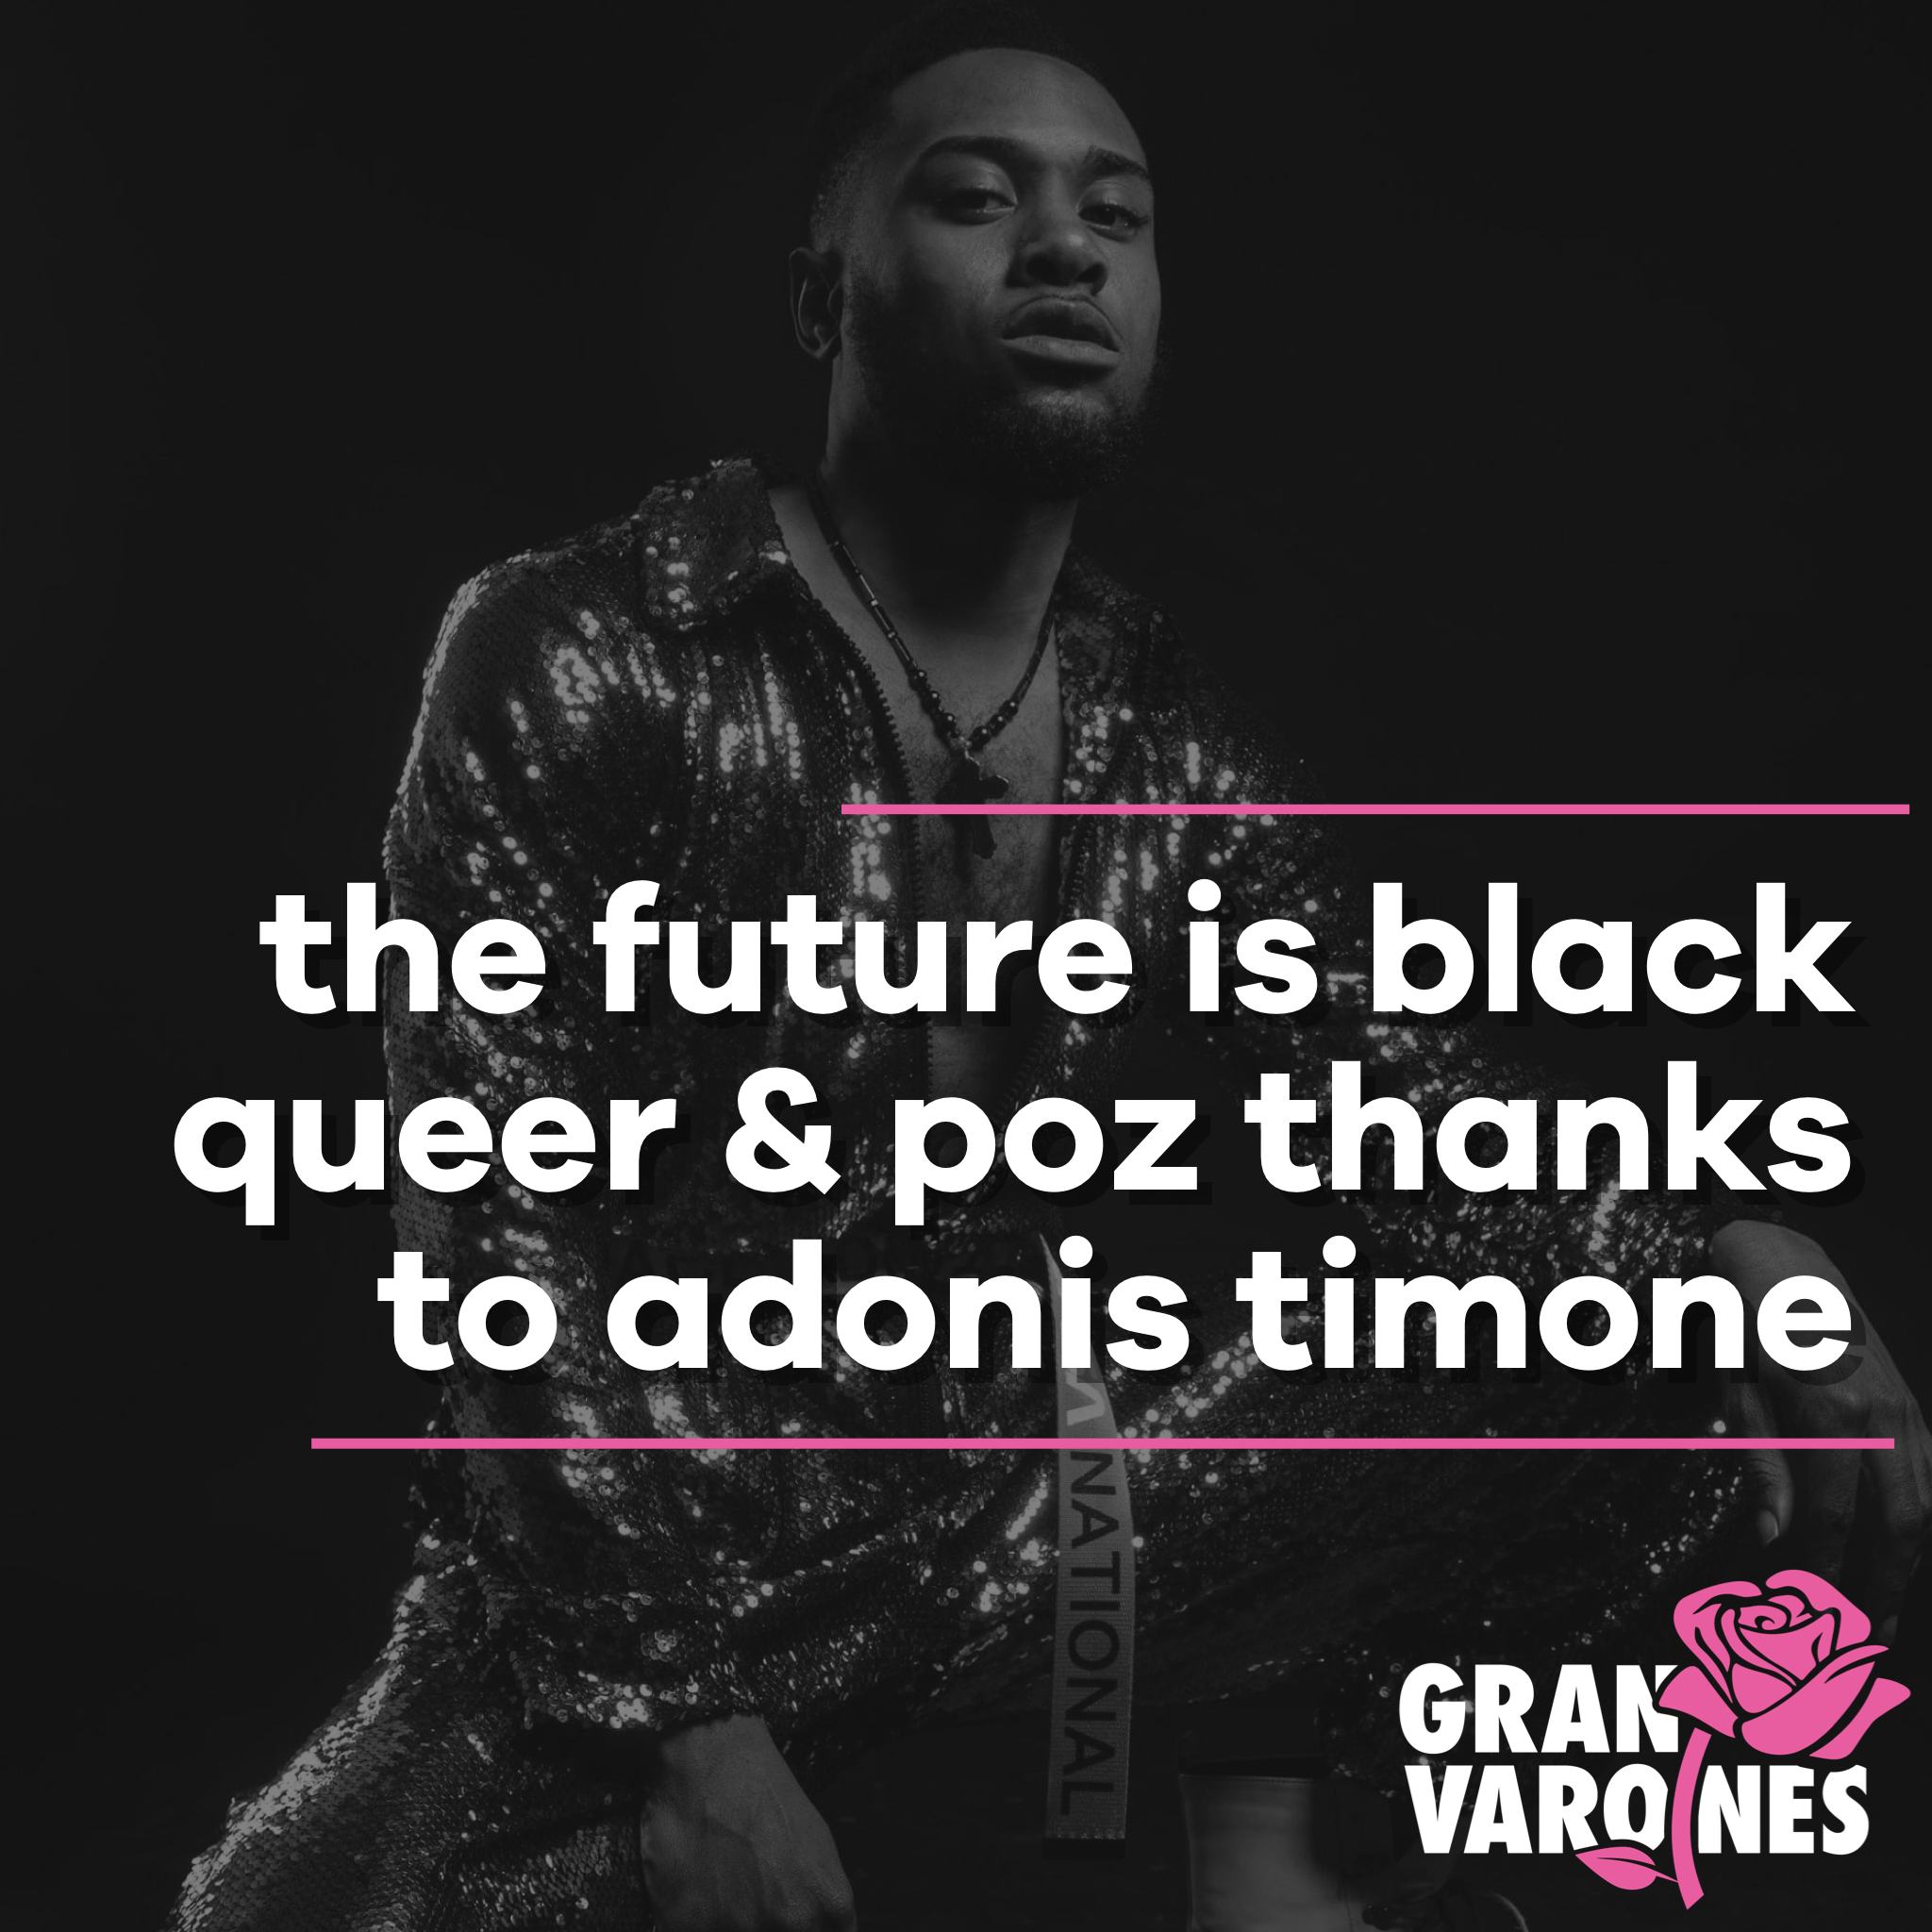 The Future is Black, Queer & Poz Thanks Adonis Timone